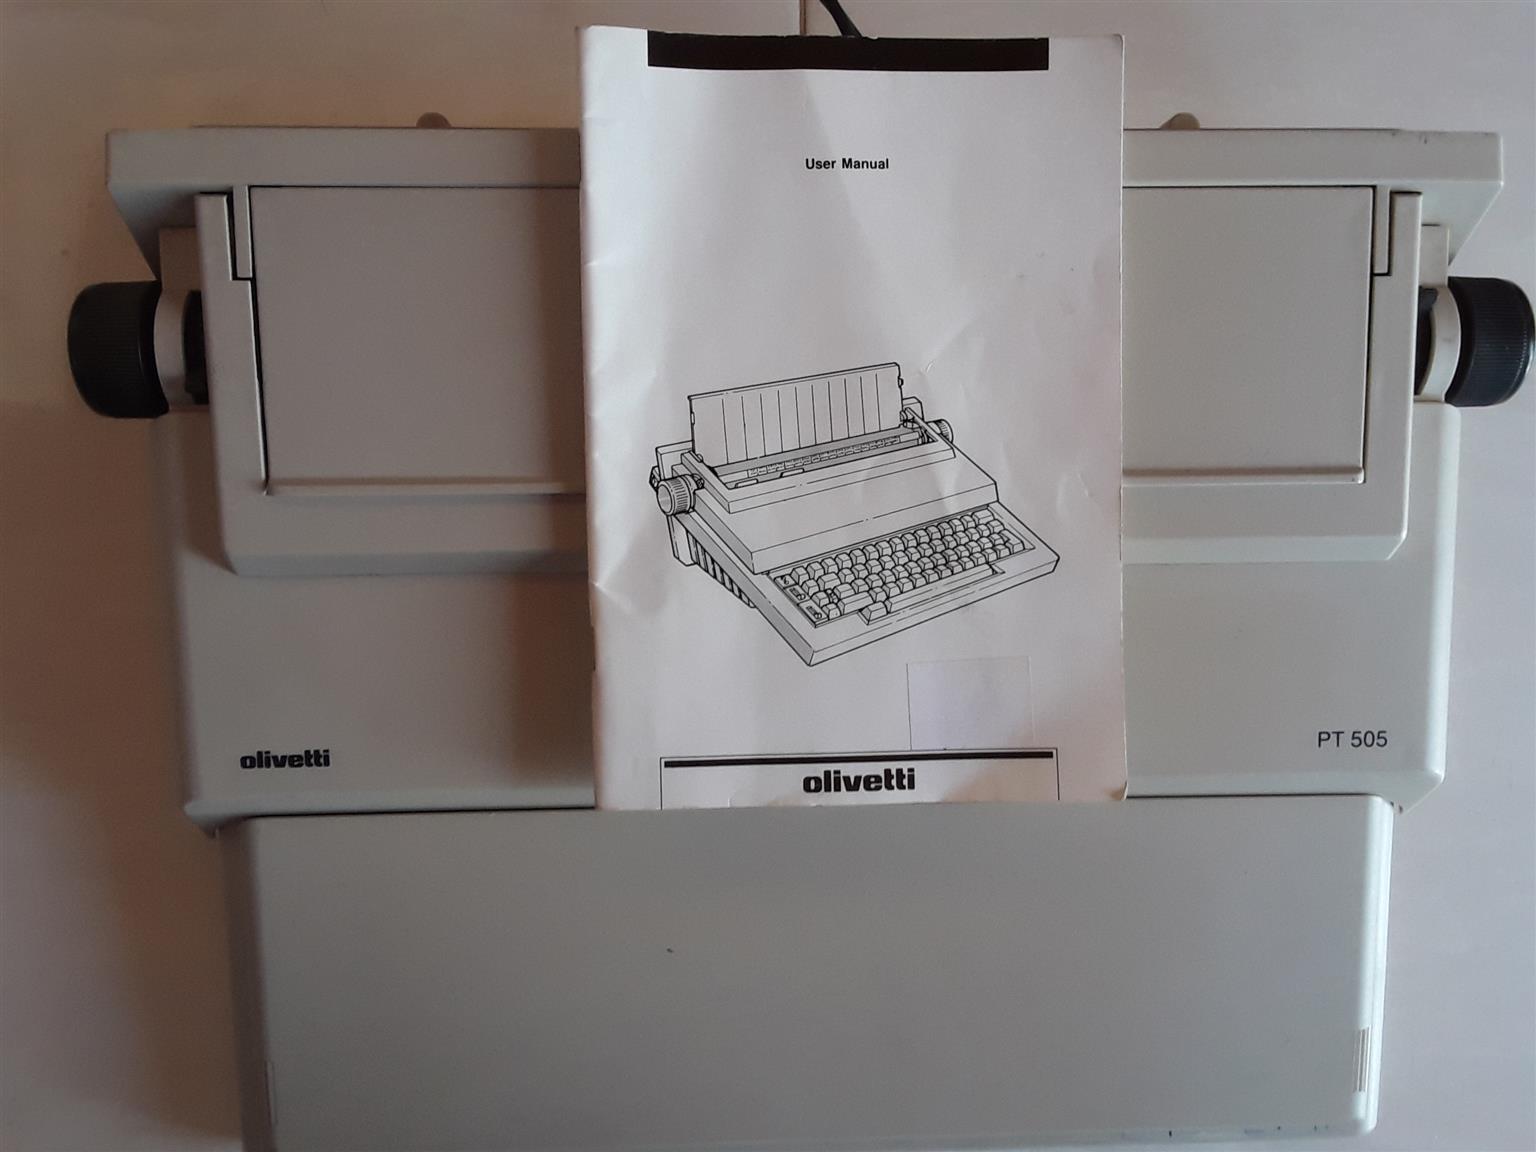 Olivetti PT505 Electric Typewriter with User Manual and new Ribbon. Working perfectly. 